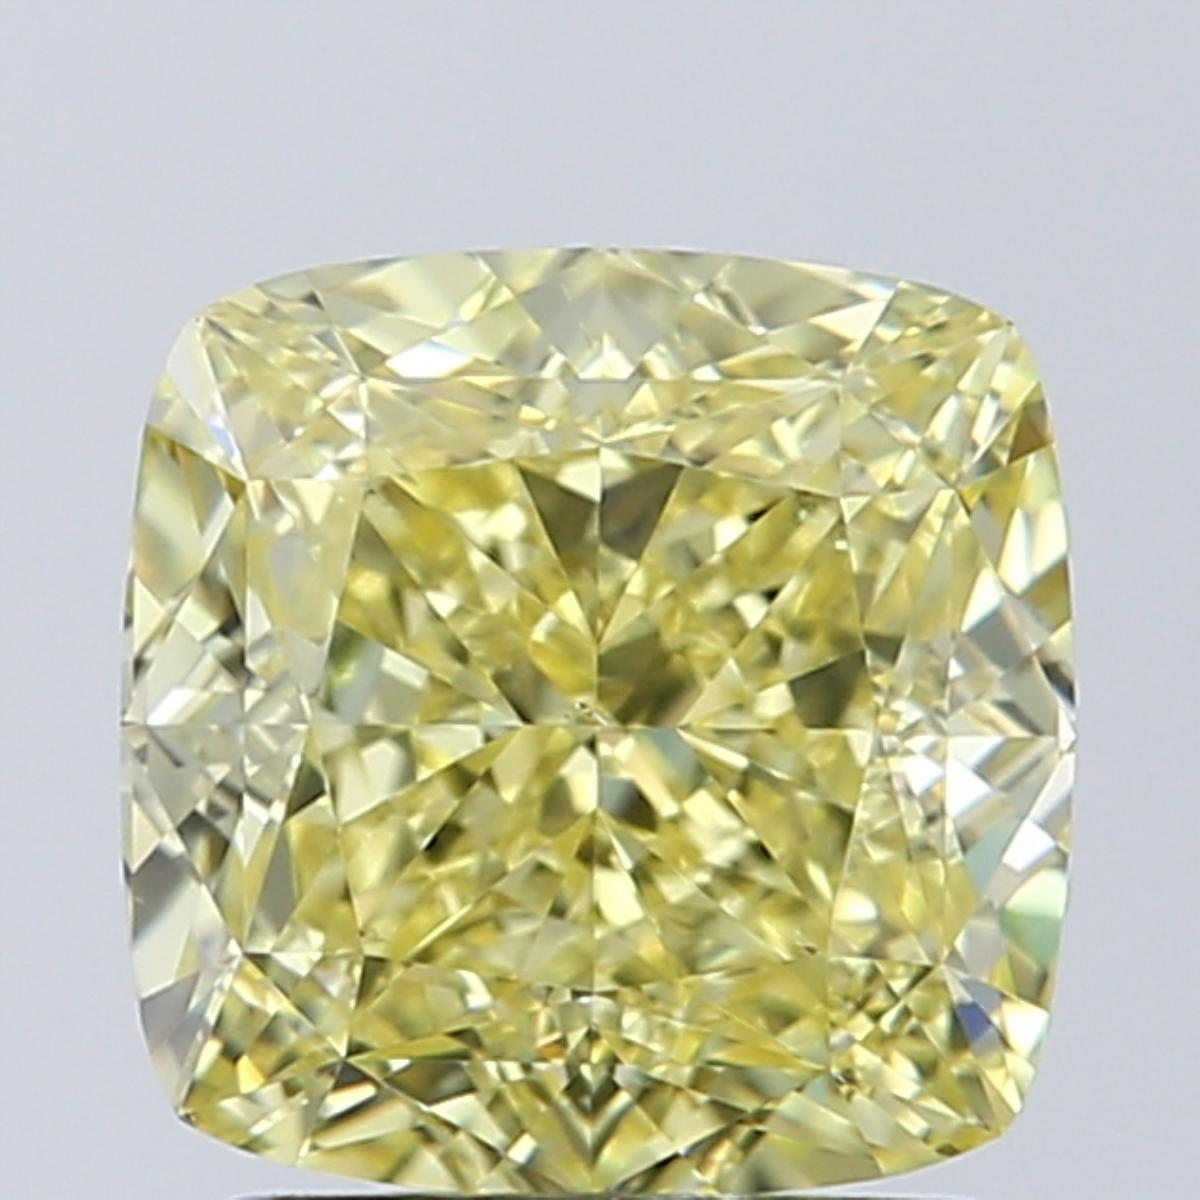 GIA Certified Diamond 2.00-2.05 Carat VVS2, Fancy Intense Yellow, Cushion Cut

Perfect Yellow Color Diamonds for perfect gifts. 
Beautiful Canary Yellow with great Sparkle & Fire.

5 C's:
Certificate: GIA
Carat: 2.00-2.05ct
Color: Natural Fancy